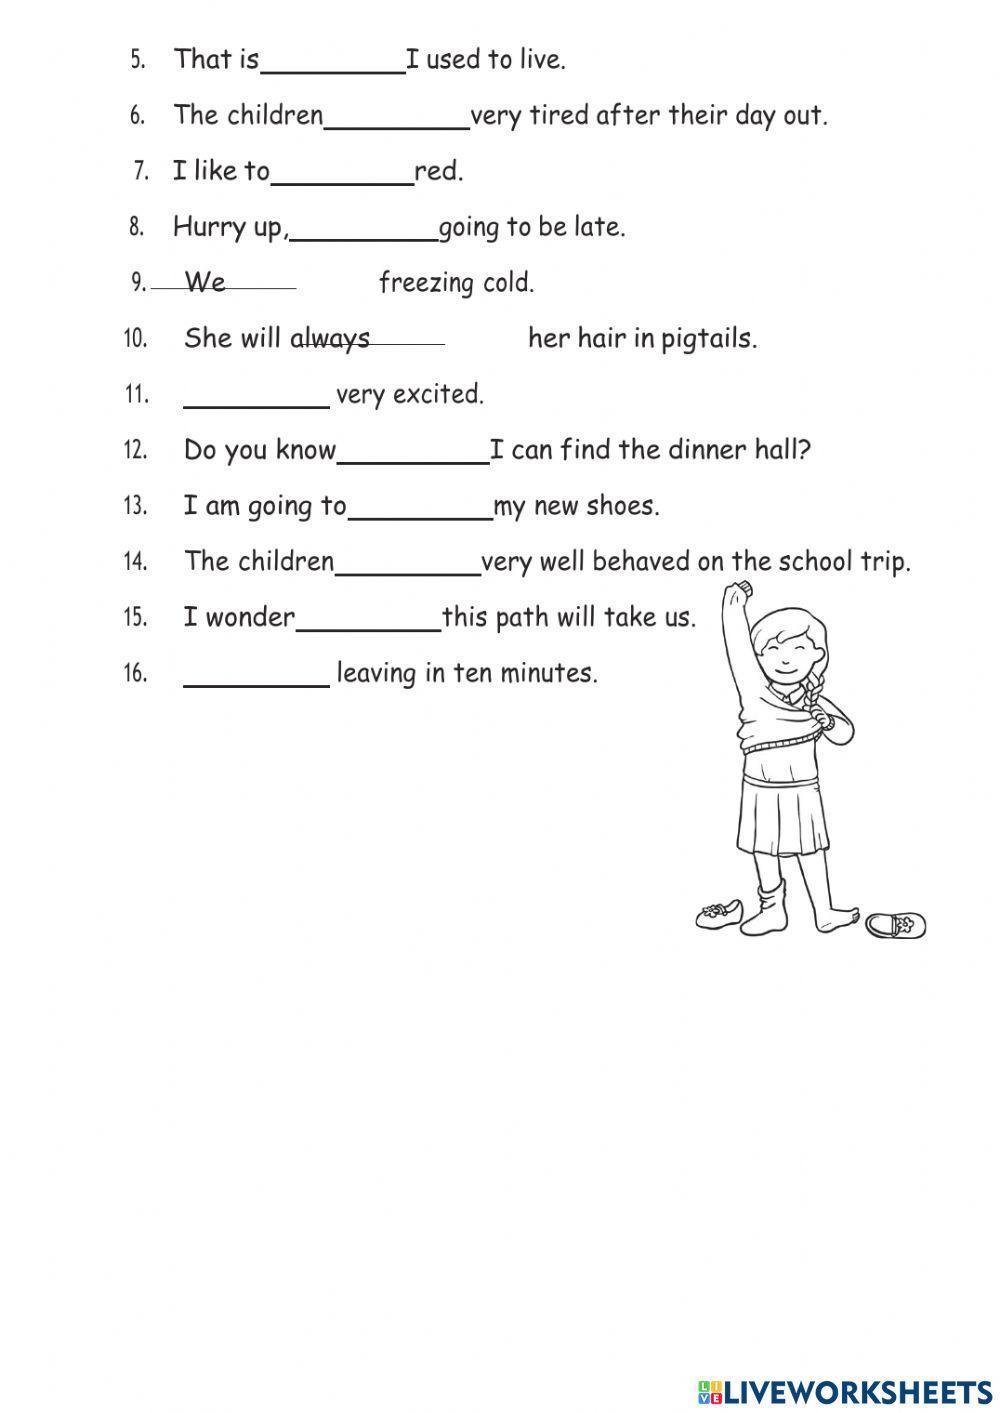 DIS English Term 2 Week 11 Lesson 1 and 2